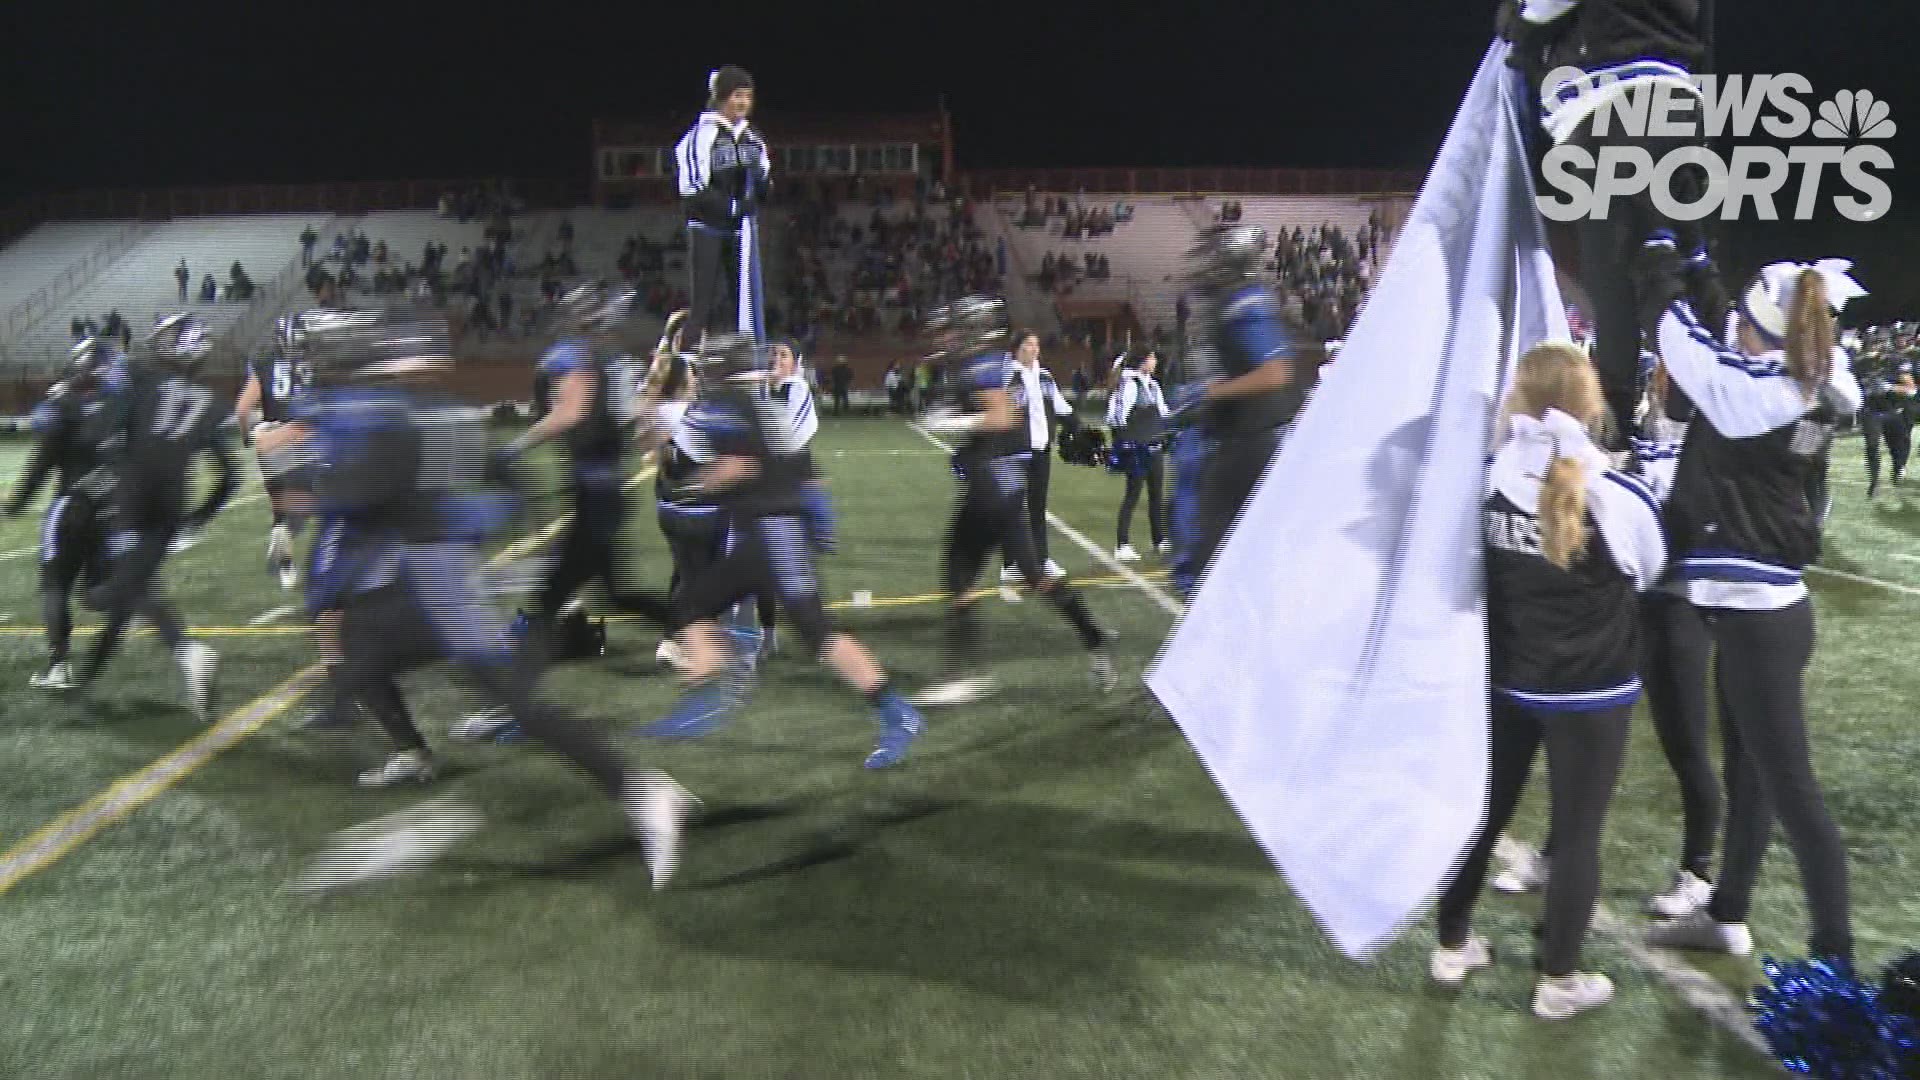 The Eagles and Falcons were tied at seven early on, before Valor Christian was able to pull away.